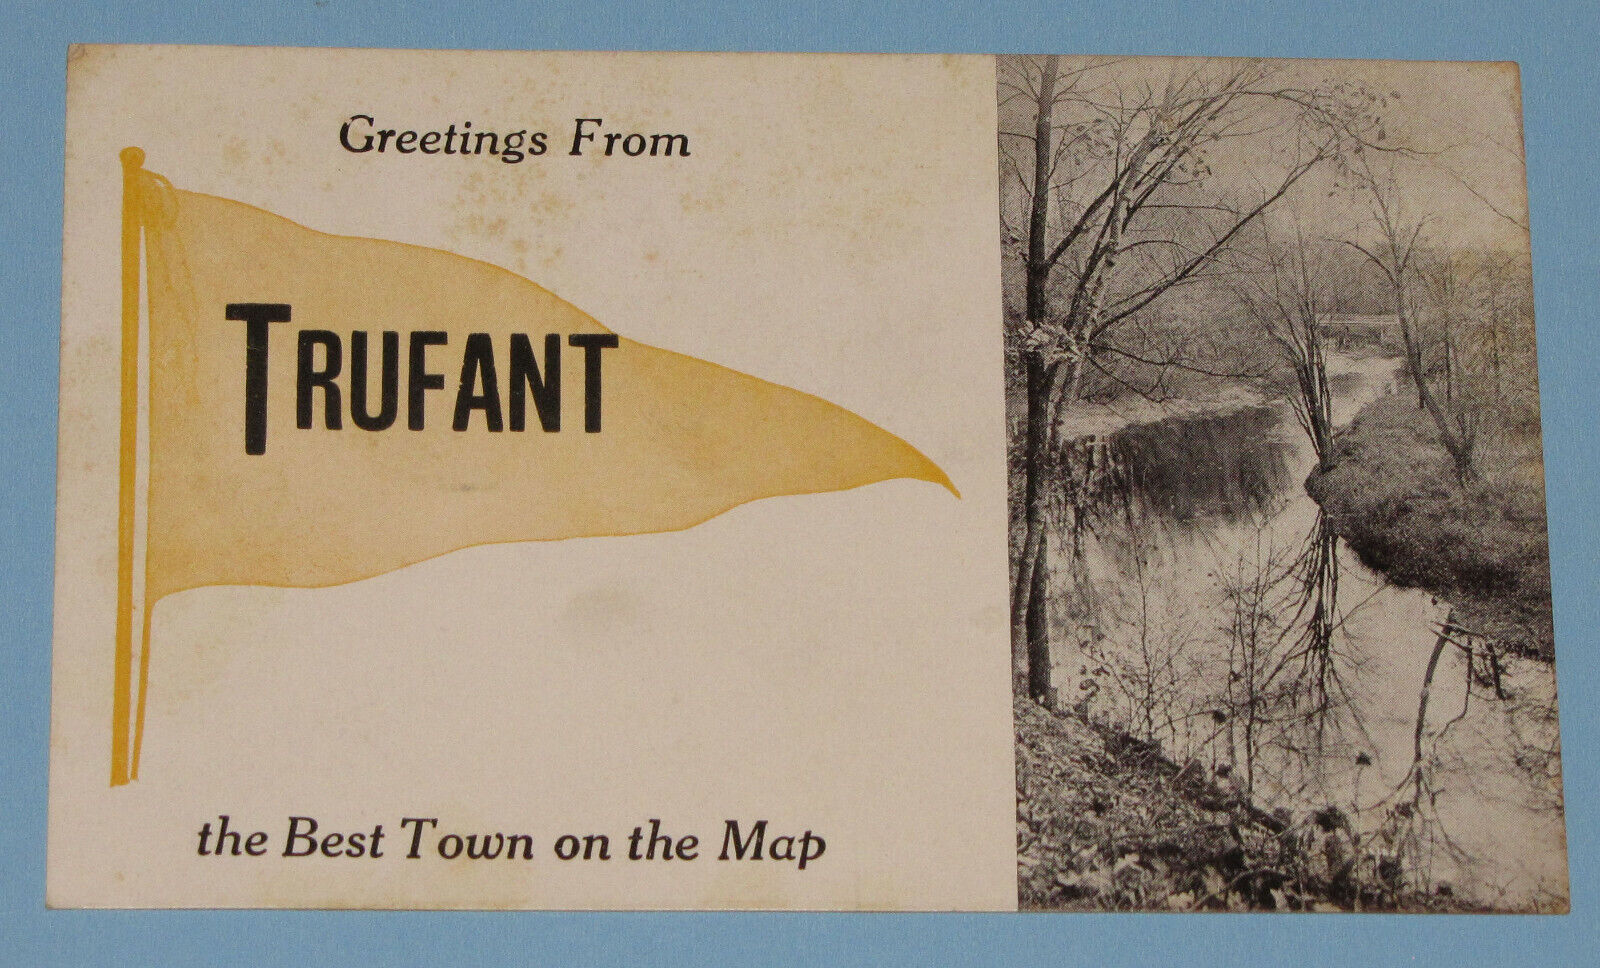 MICHIGAN TRUFANT GREETINGS MICH MONTCALM COUNTY POSTED 1912 MI VINTAGE POSTCARD 